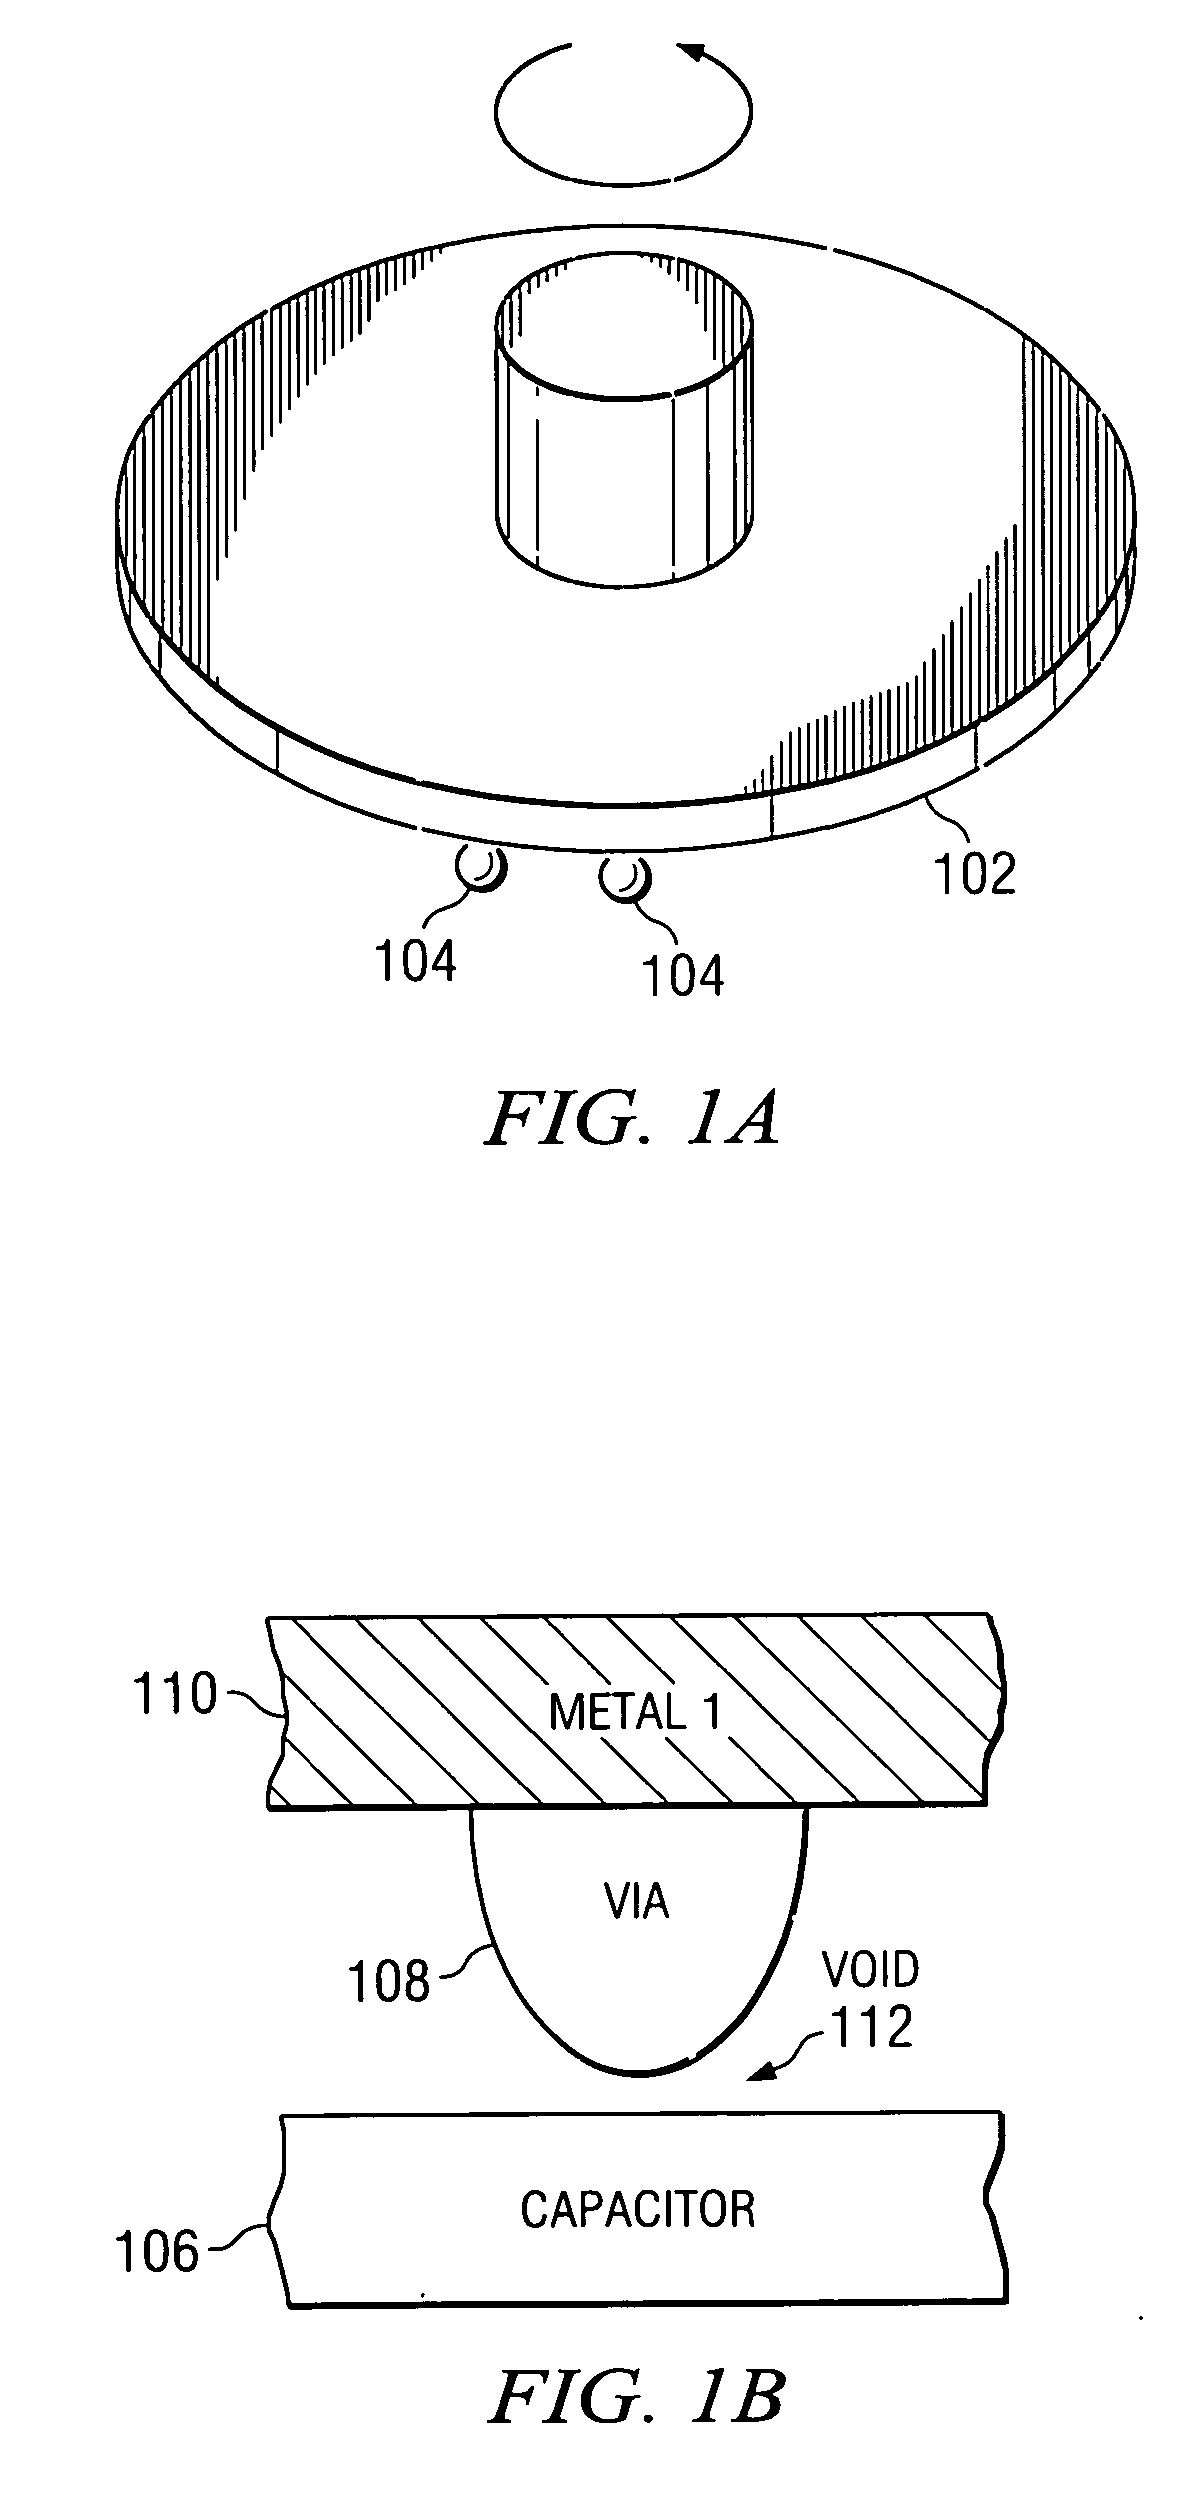 Direct mapped repair cache systems and methods